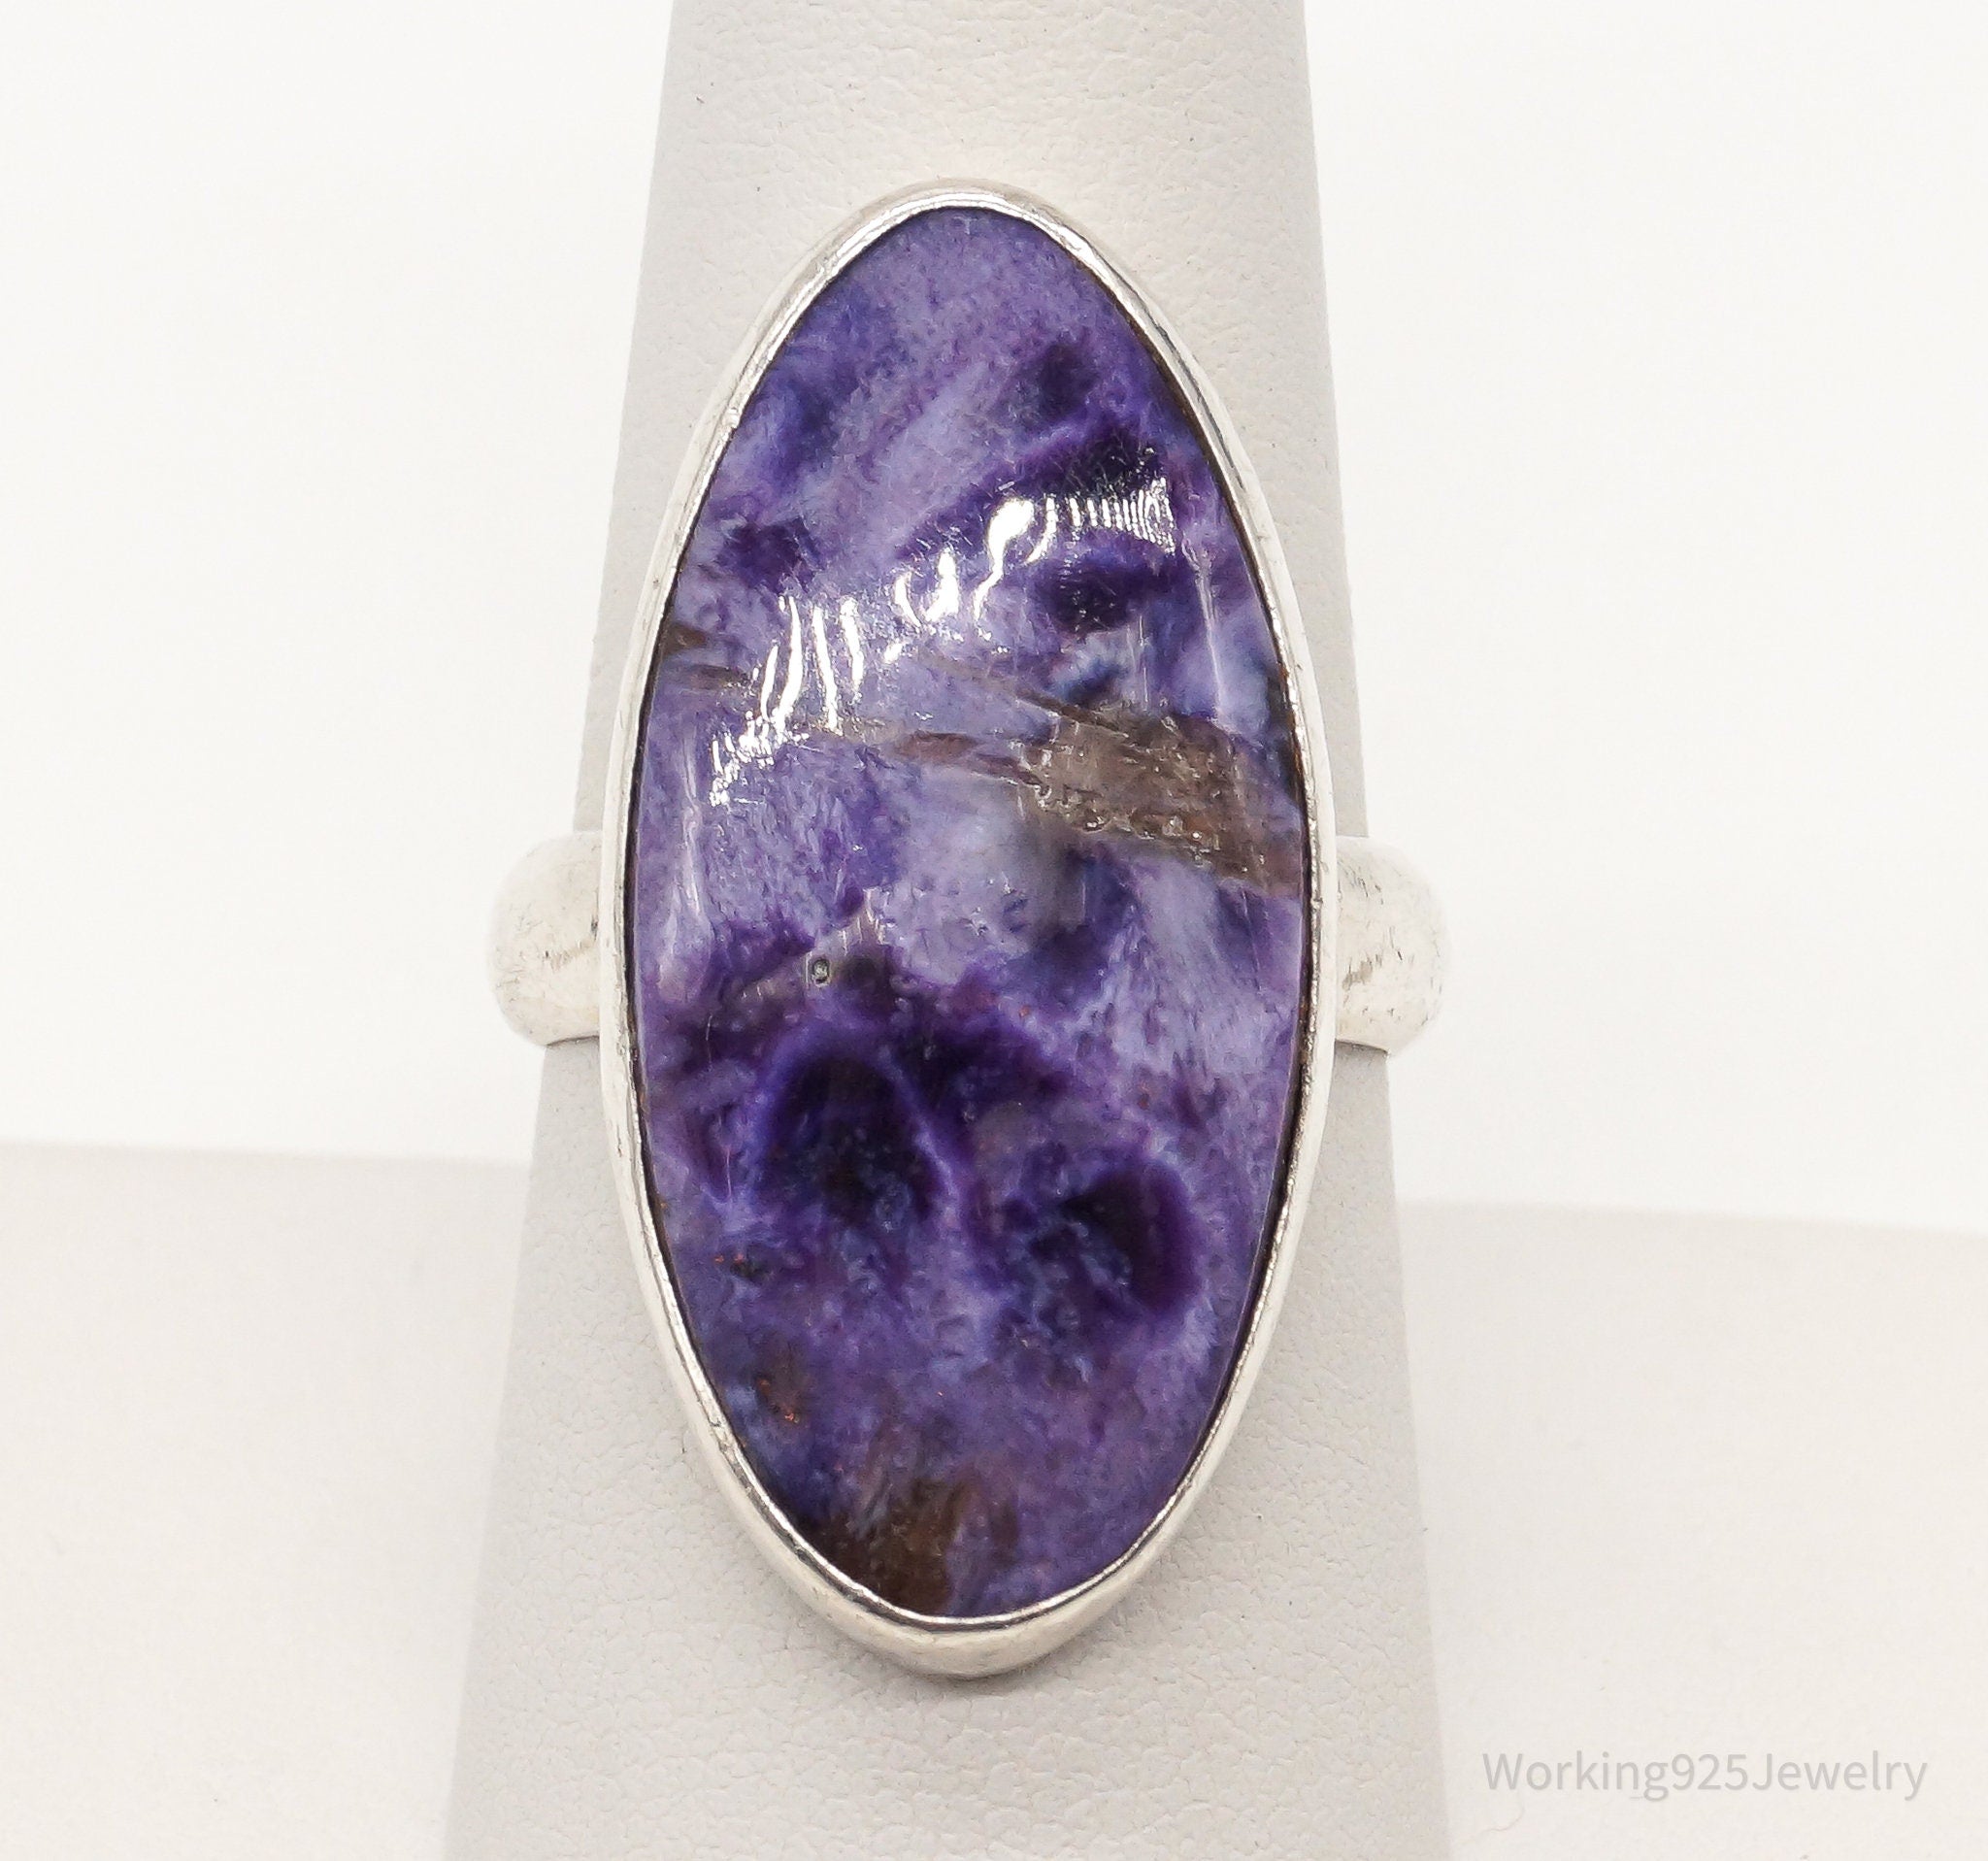 Vintage Large Charoite Sterling Silver Ring - Size 8.25